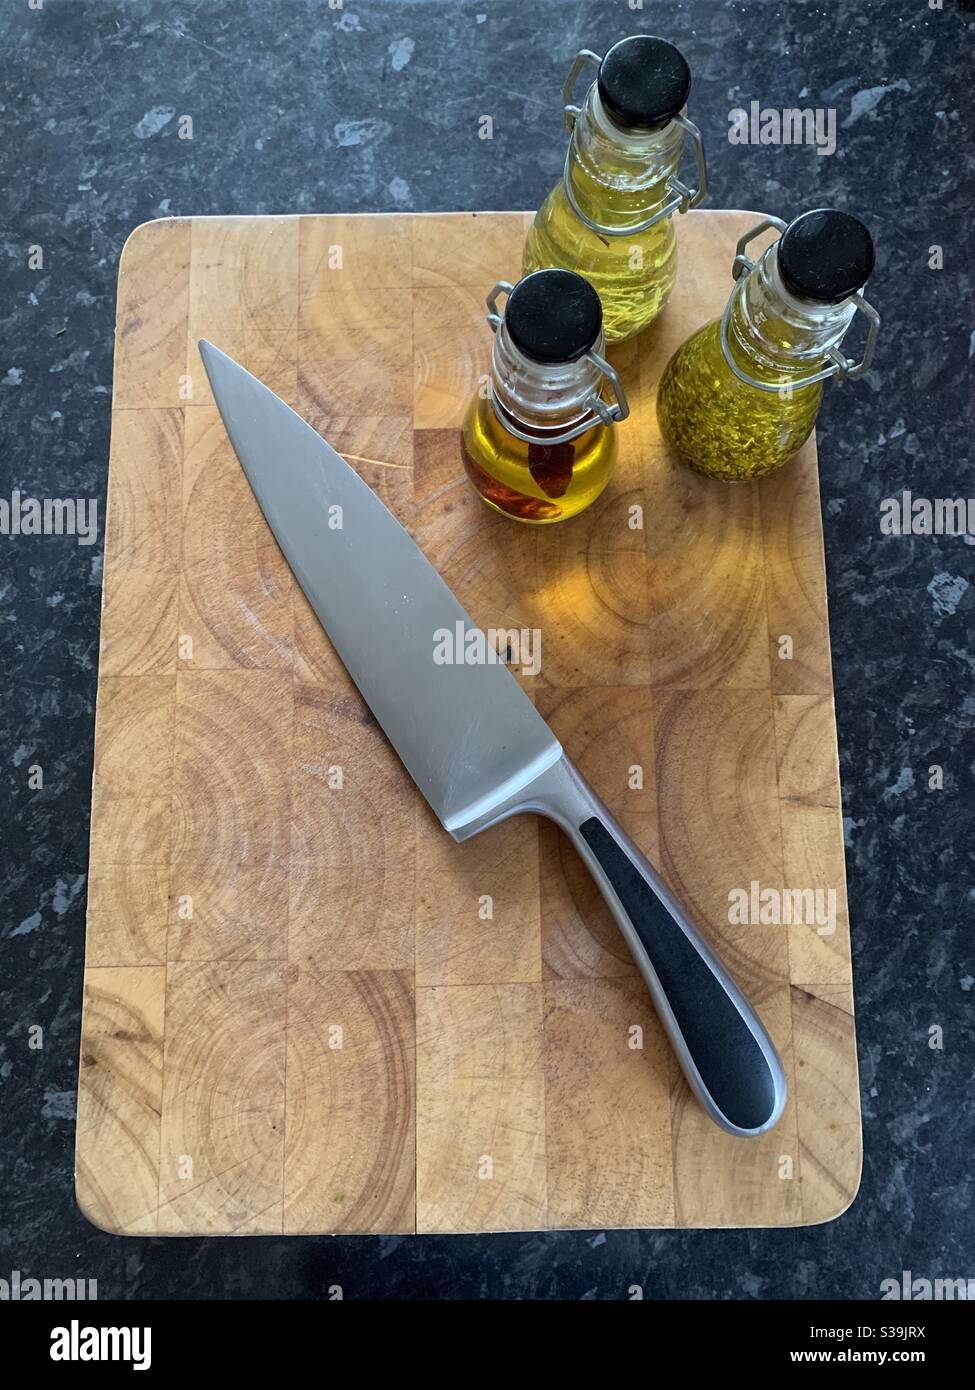 Chef’s knife on butcher block chopping board with infused oils in small glass bottles Stock Photo